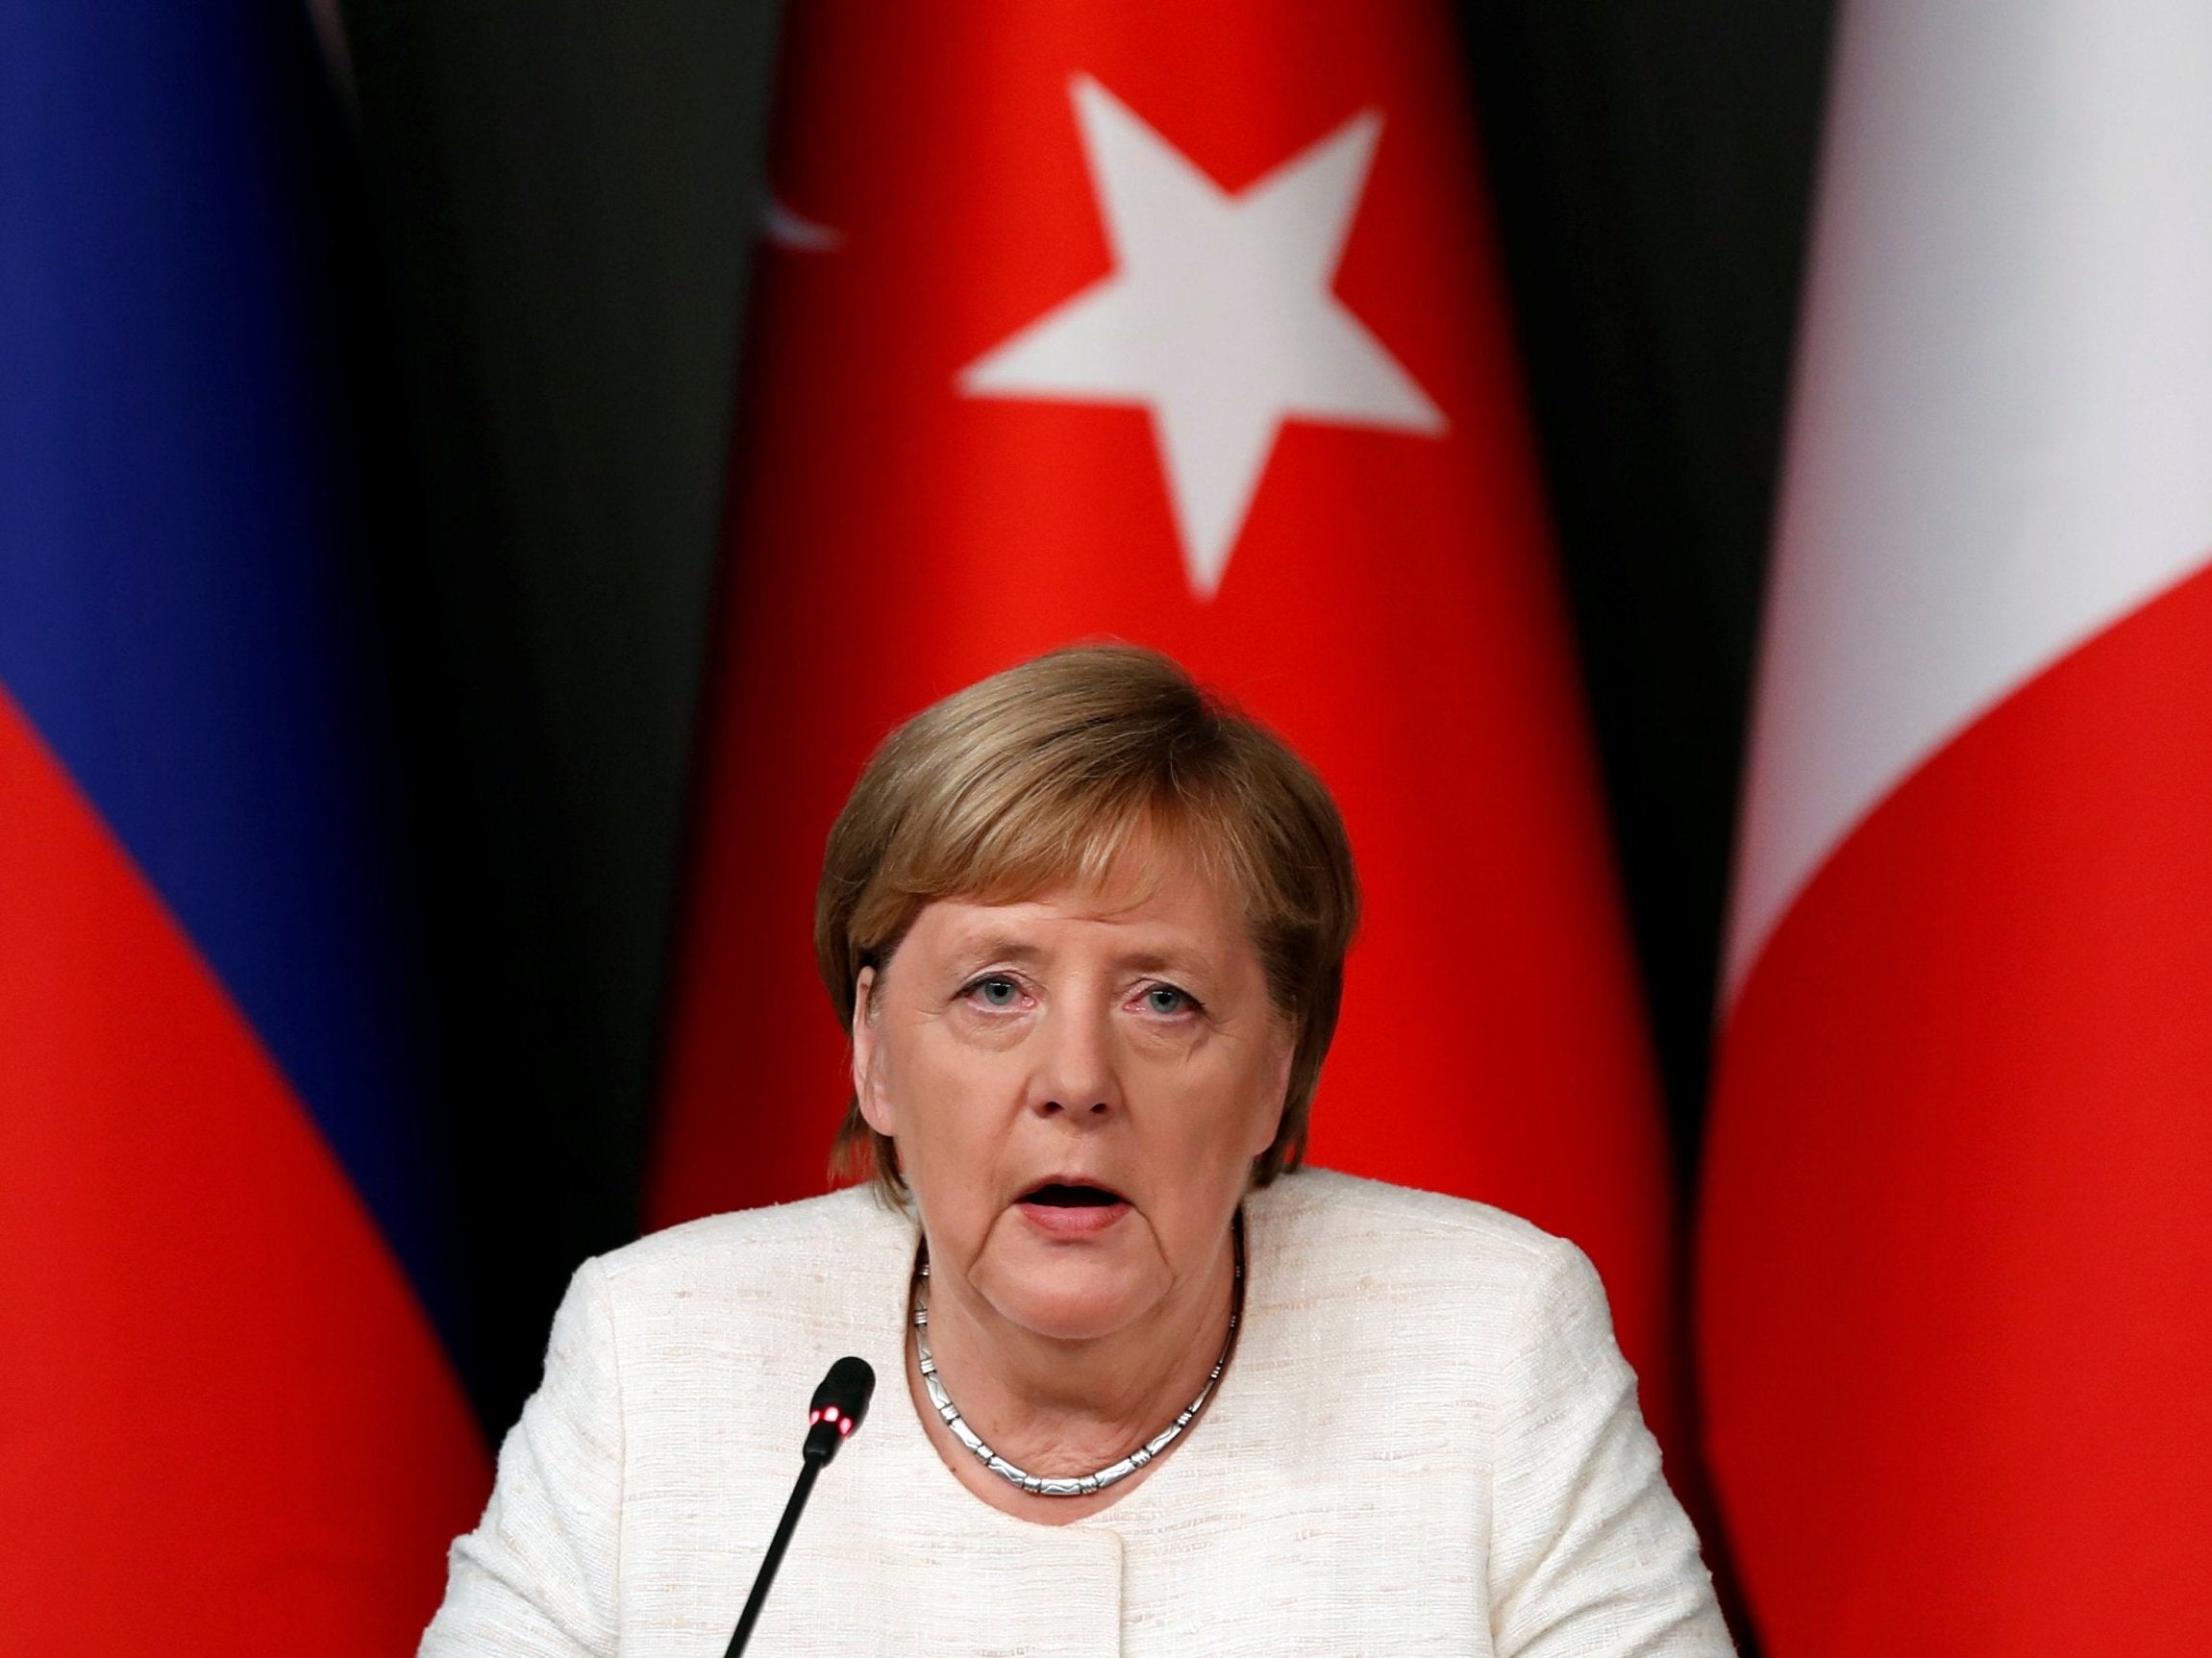 Merkel's fourth and probably final government has already come close to collapsing twice